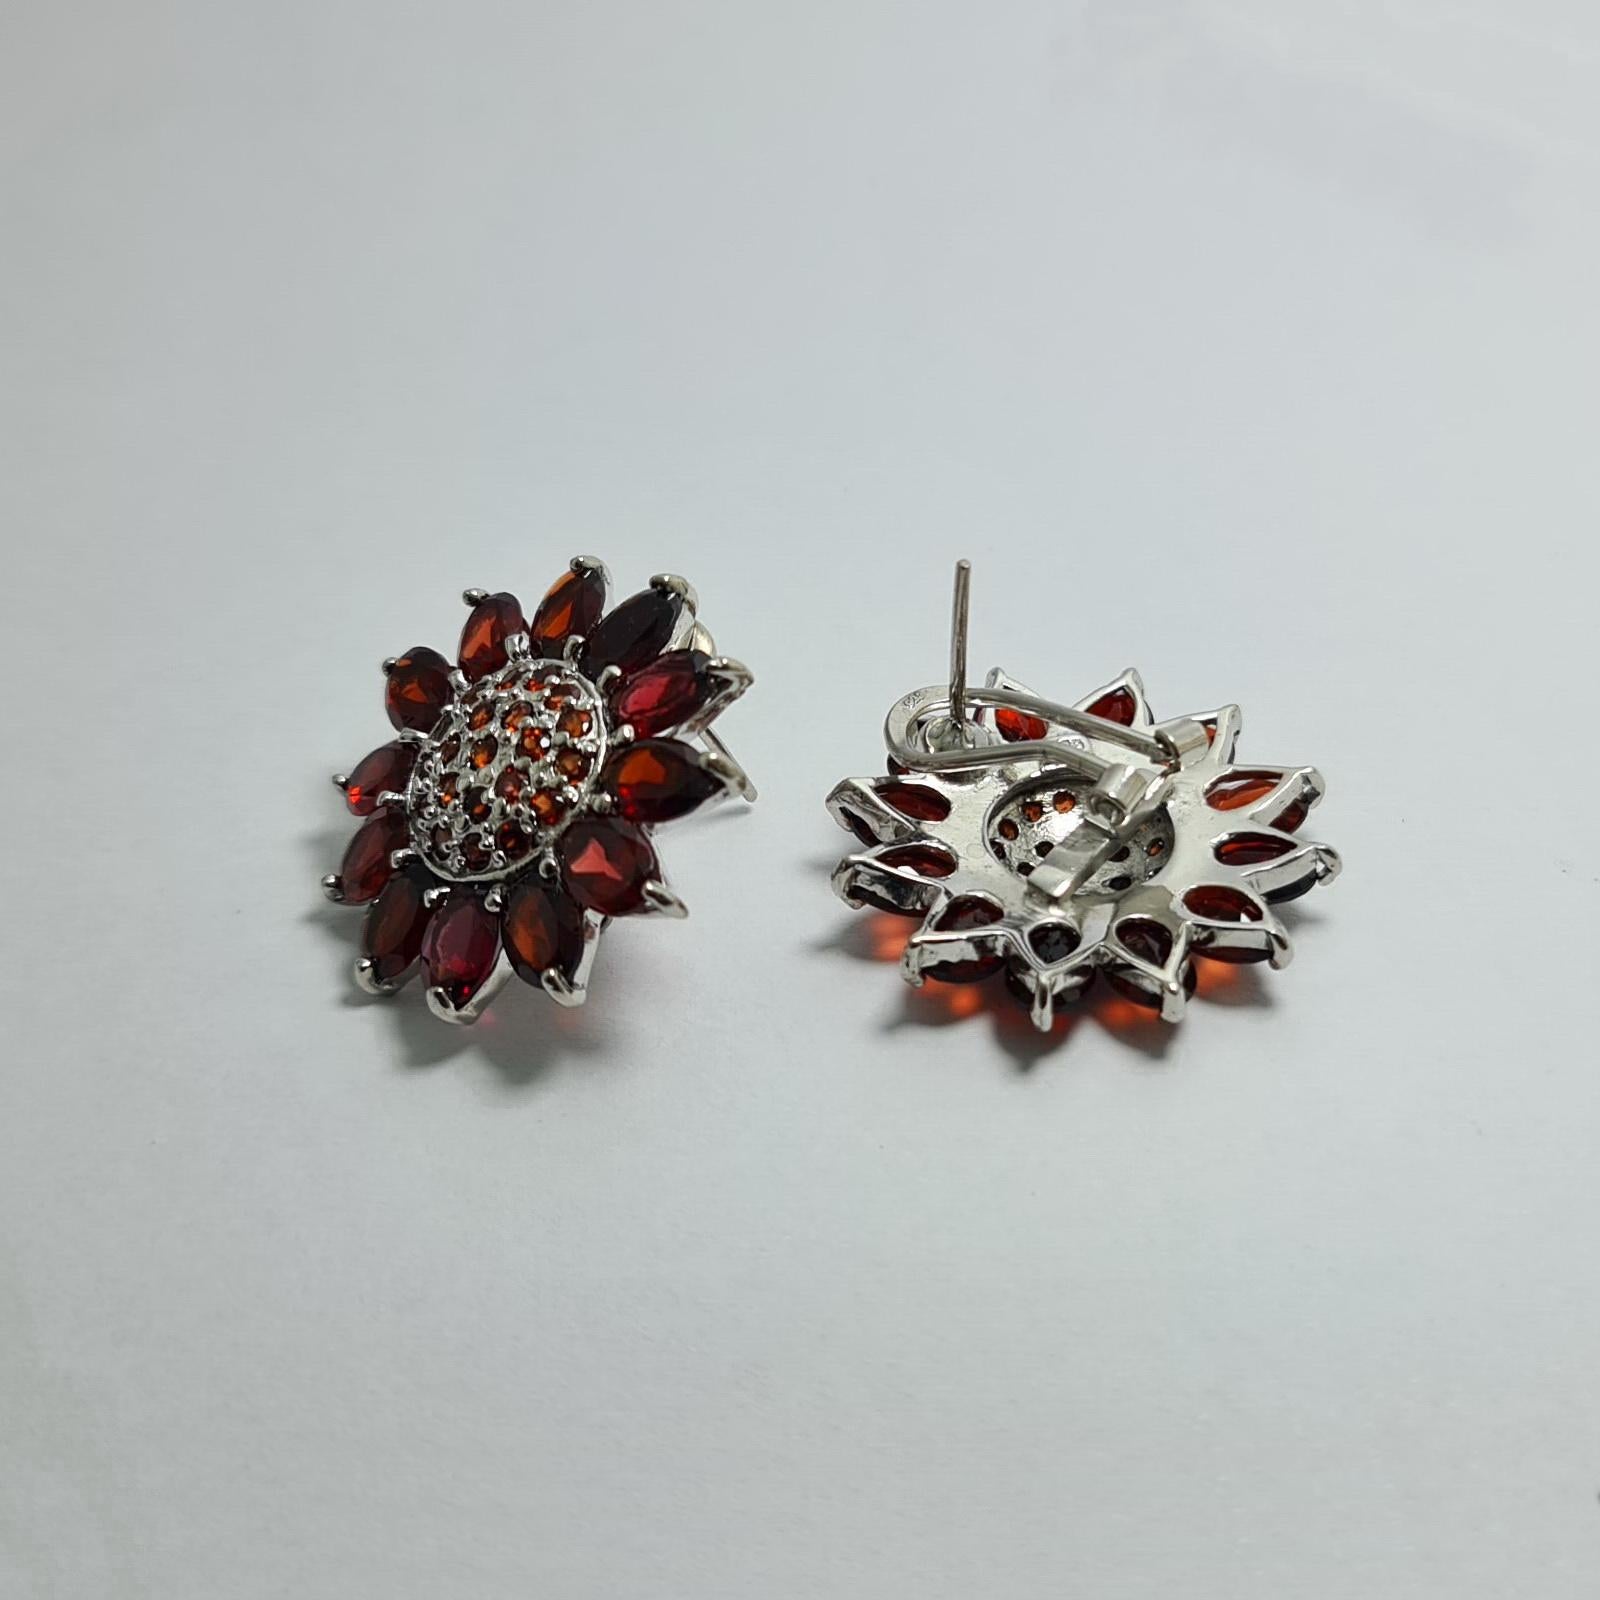 Natural Untreated Red Garnet Pure .925 Sterling Silver Rhodium Plated Sunflower Earrings

Total weight of the earrings: 18 grams
Total weight of the Garnets: 16 carats

Please check other listings for matching sets 

